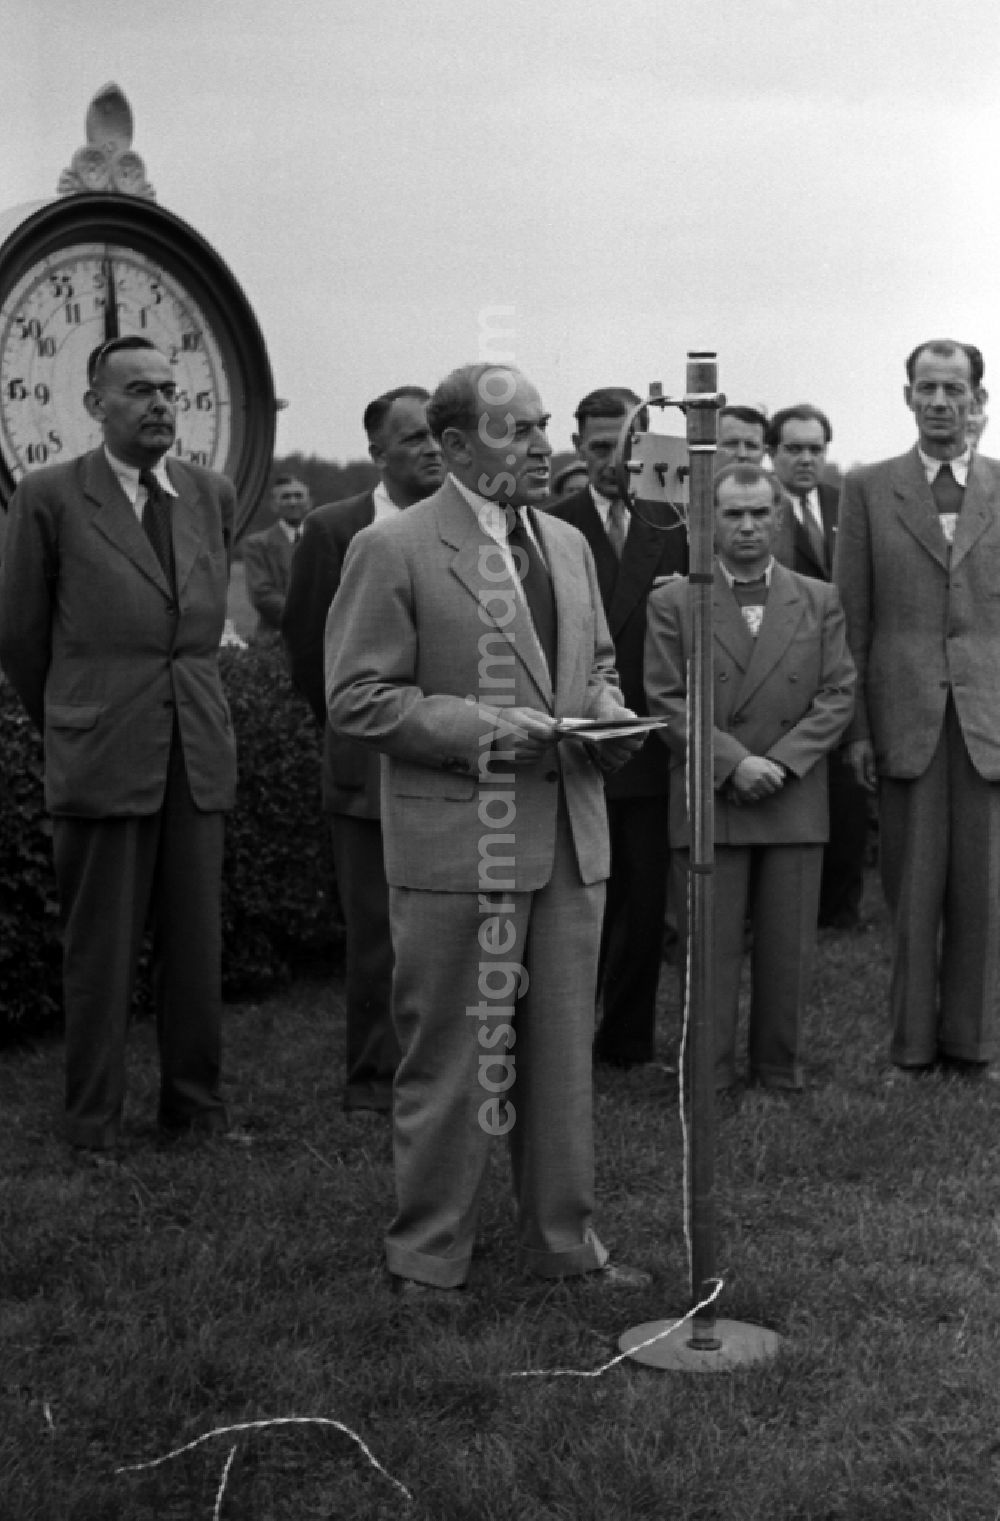 GDR image archive: Hoppegarten - Paul Scholz, Deputy Chairman of the Council of Ministers of the GDR, gives a speech at the racecourse in Hoppegarten in the state Brandenburg on the territory of the former GDR, German Democratic Republic